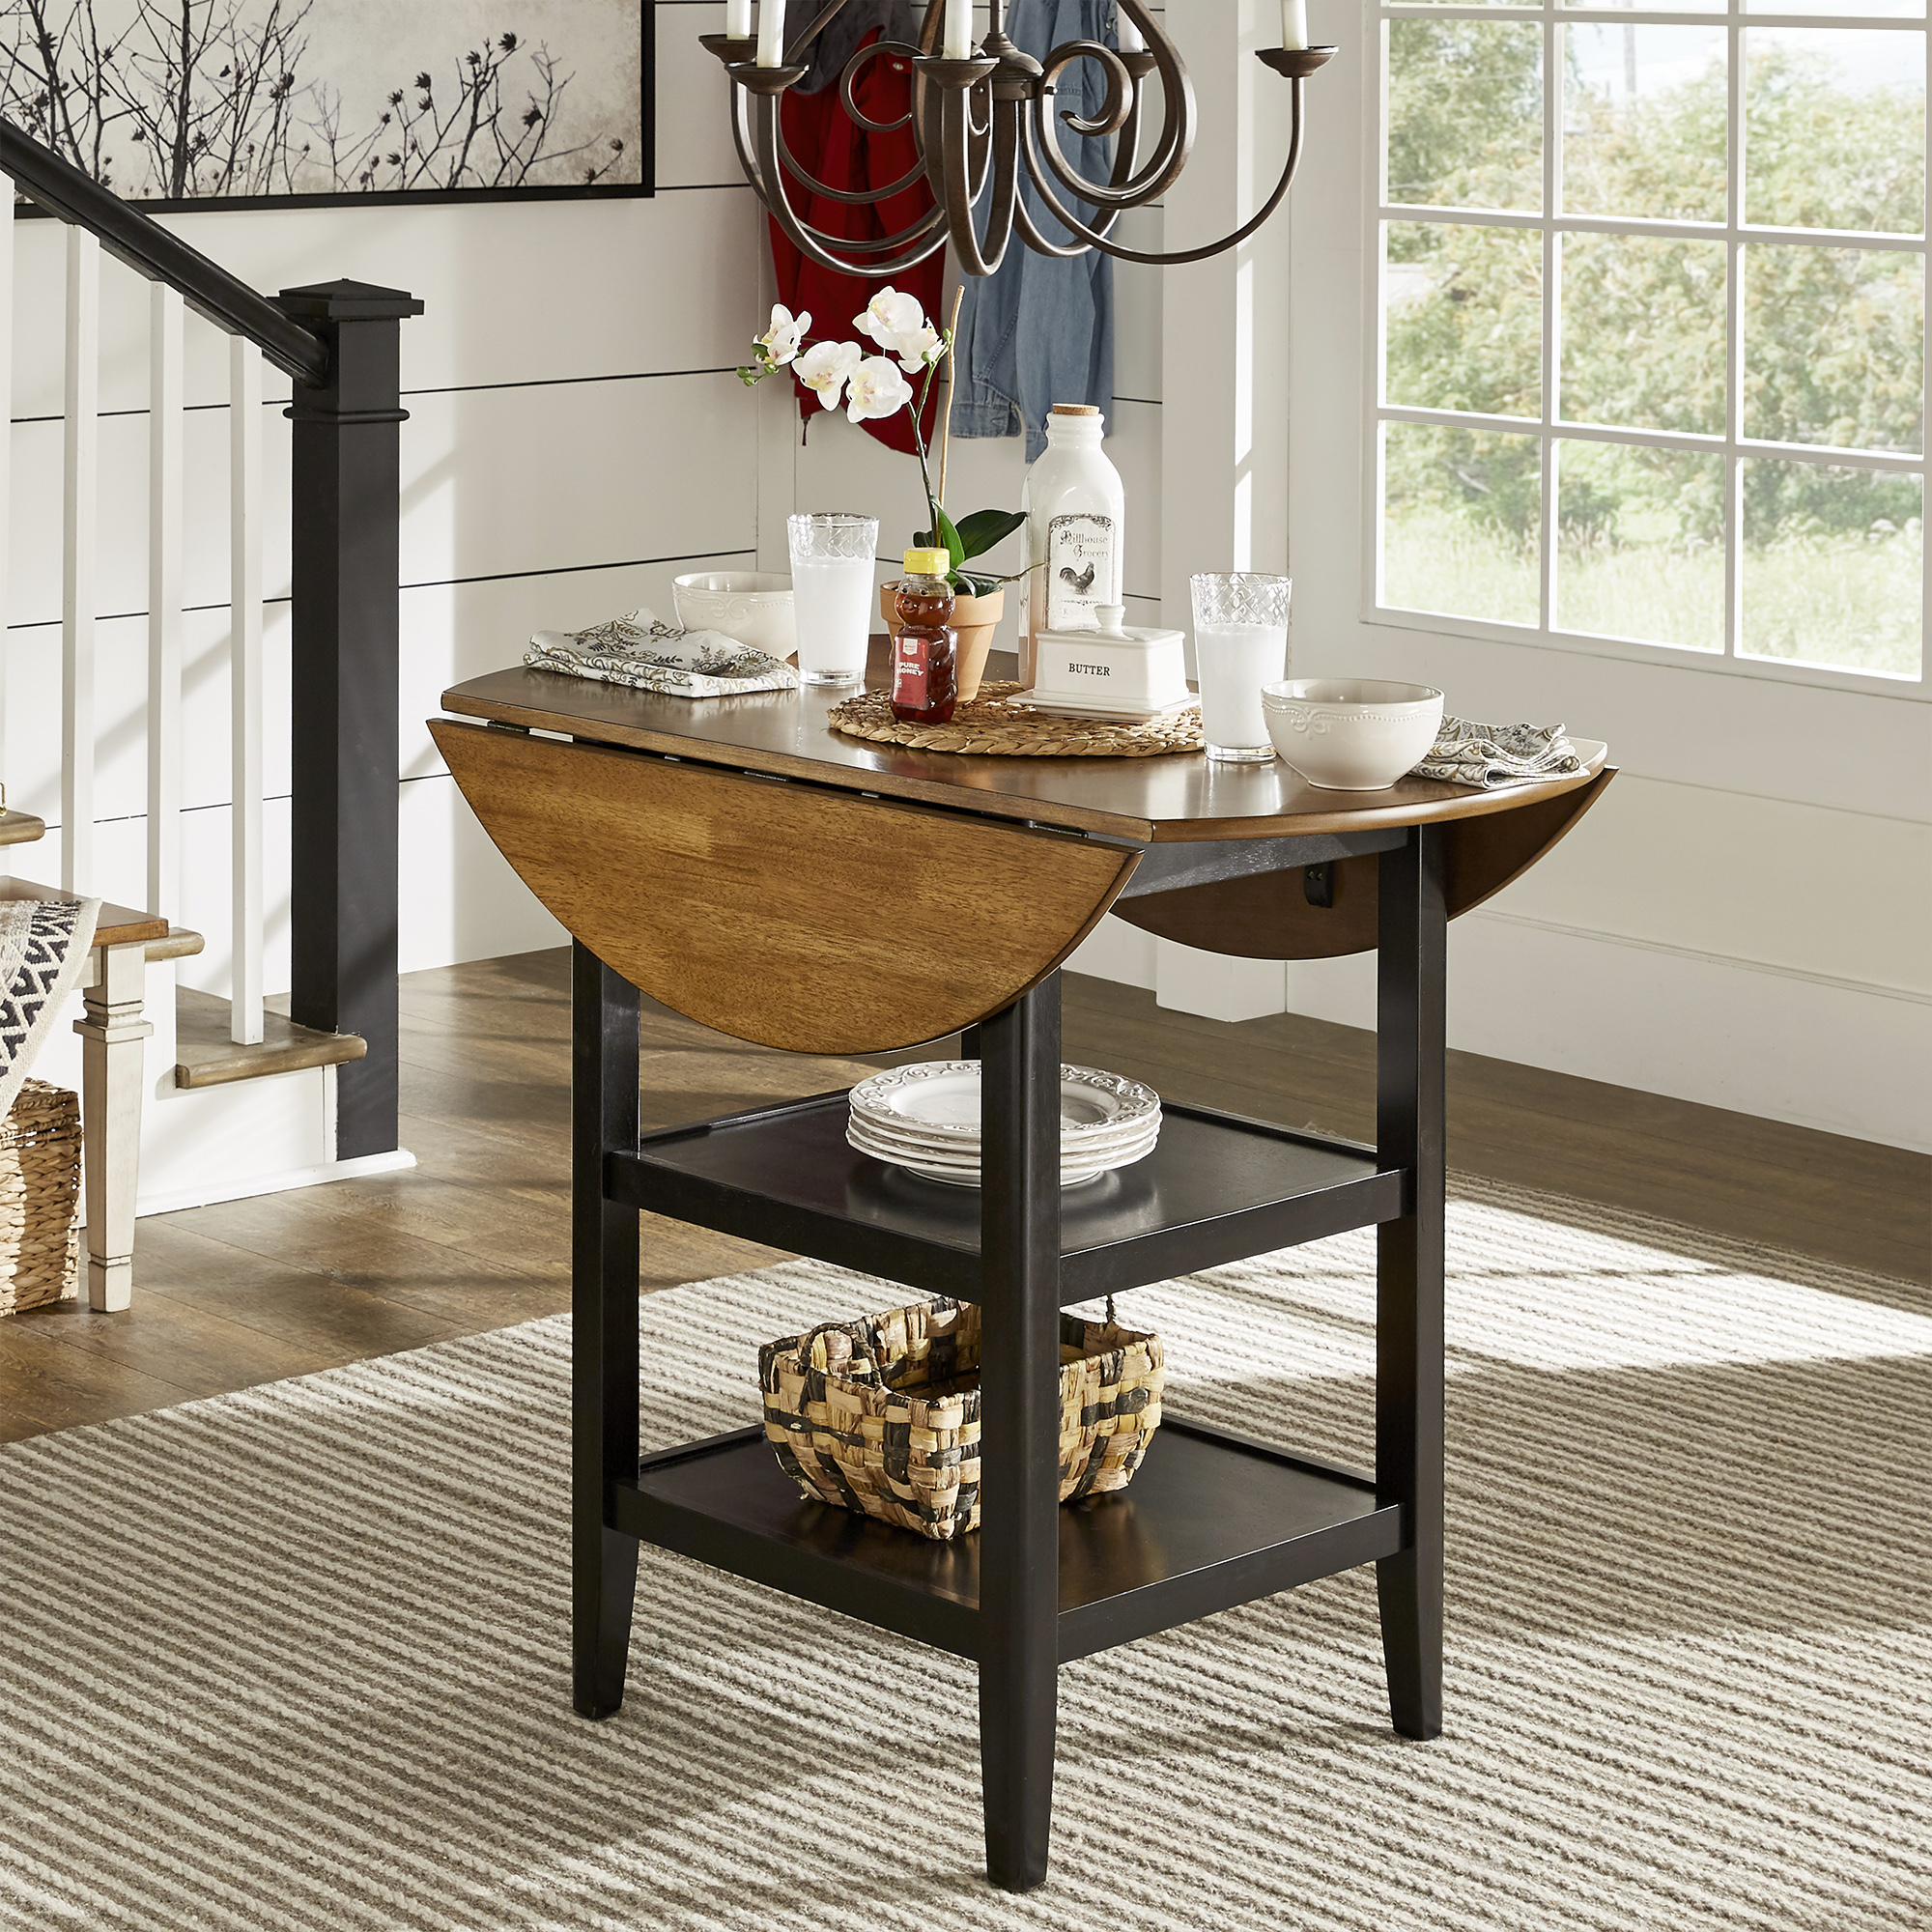 Now we move onto discussing furniture materials for hard surfaces. We begin with wood, specifically rubberwood. Pictured here is the Antique Black Drop Leaf Round Counter Height Dining Table. It has an oak-finished top with the sides dropped down for a narrower surface. The antique black finish base has two open shelves to store extra kitchen wares.